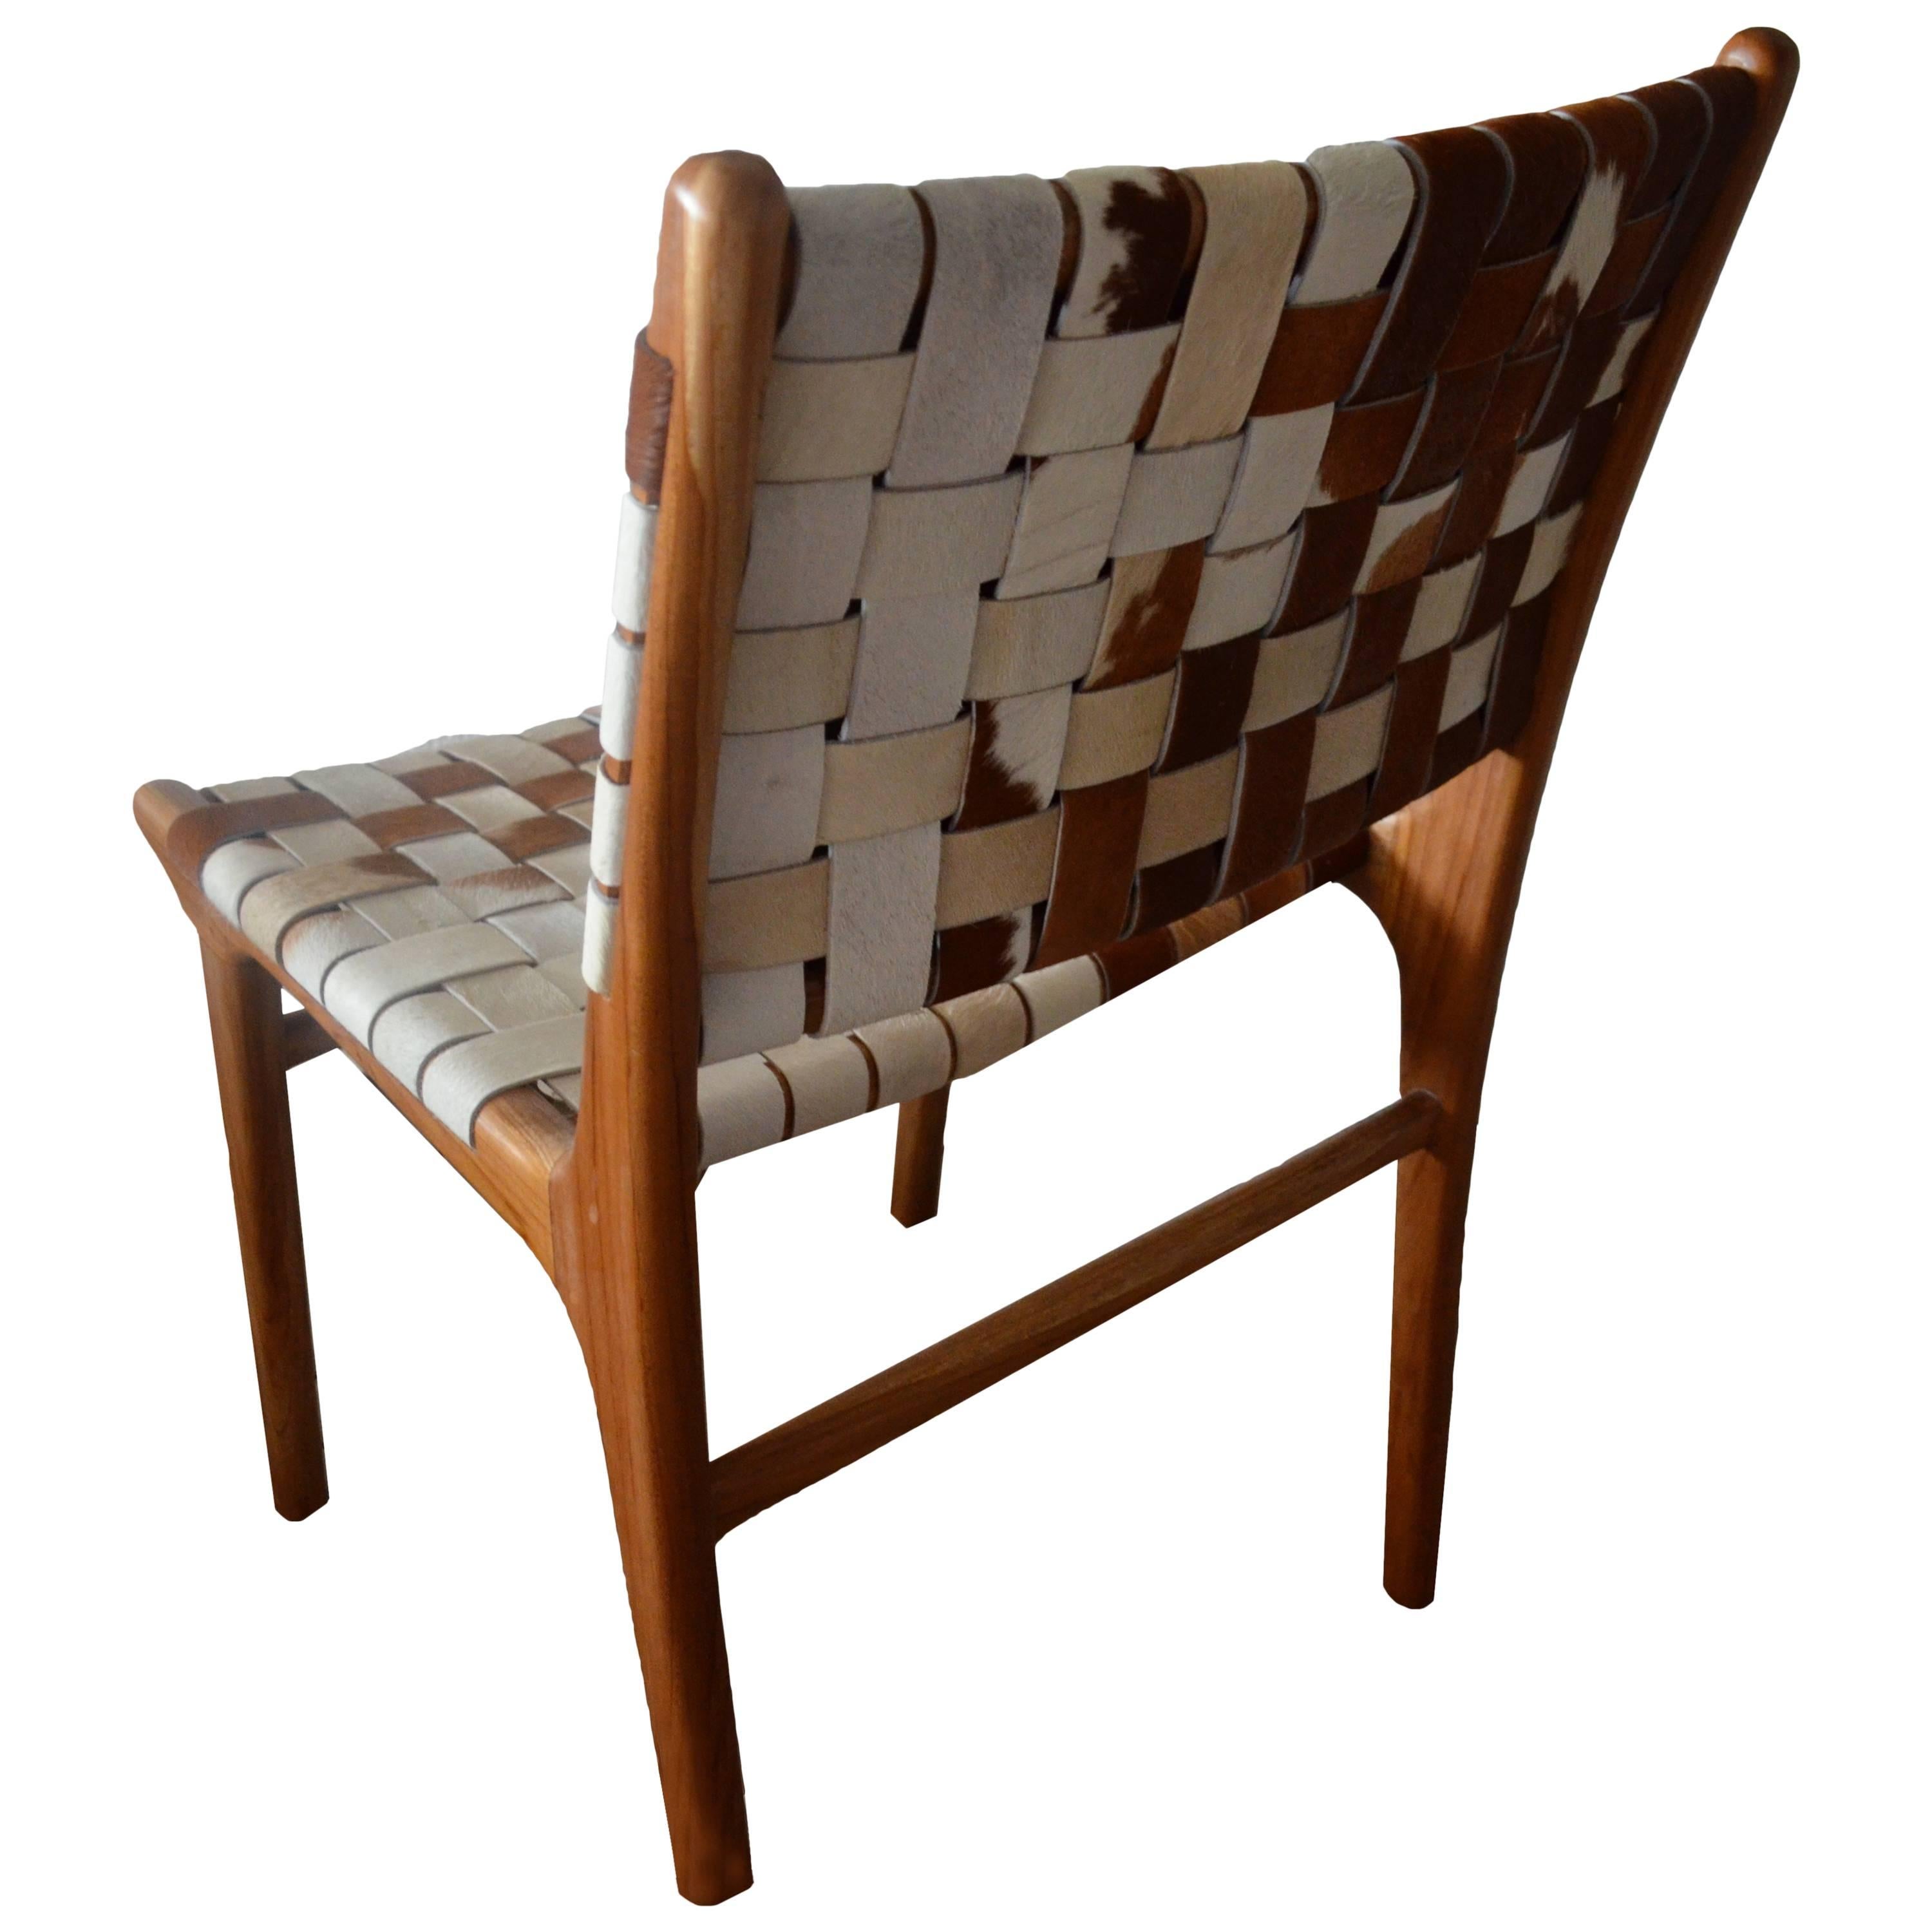 Premium quality double-back woven cowhide with teak wood frame.

Introducing the Premium Quality Cowhide Chair in the new double-back woven style. We utilize the finest quality cowhide for our modern chairs. The hand-selected cowhide is carefully